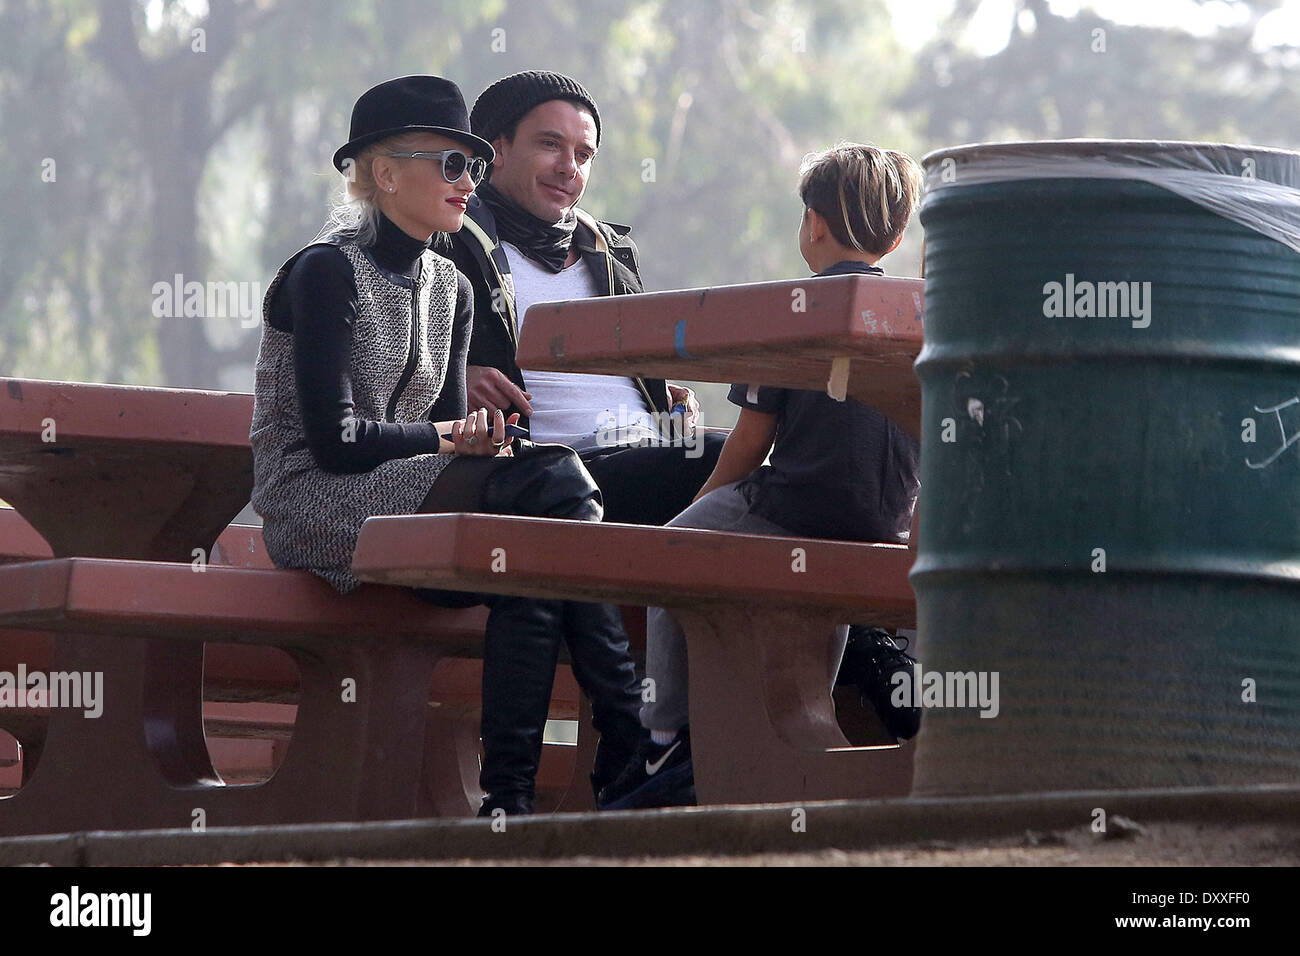 Gwen Stefani Kingston Rossdale and Gavin Rossdale Gwen Stefani and Gavin Rossdale enjoy a day together at a park with their two sons Los Angeles California - 08.12.12 Featuring: Gwen Stefani,Kingston Rossdale and Gavin Rossdale Where: United States When: Stock Photo